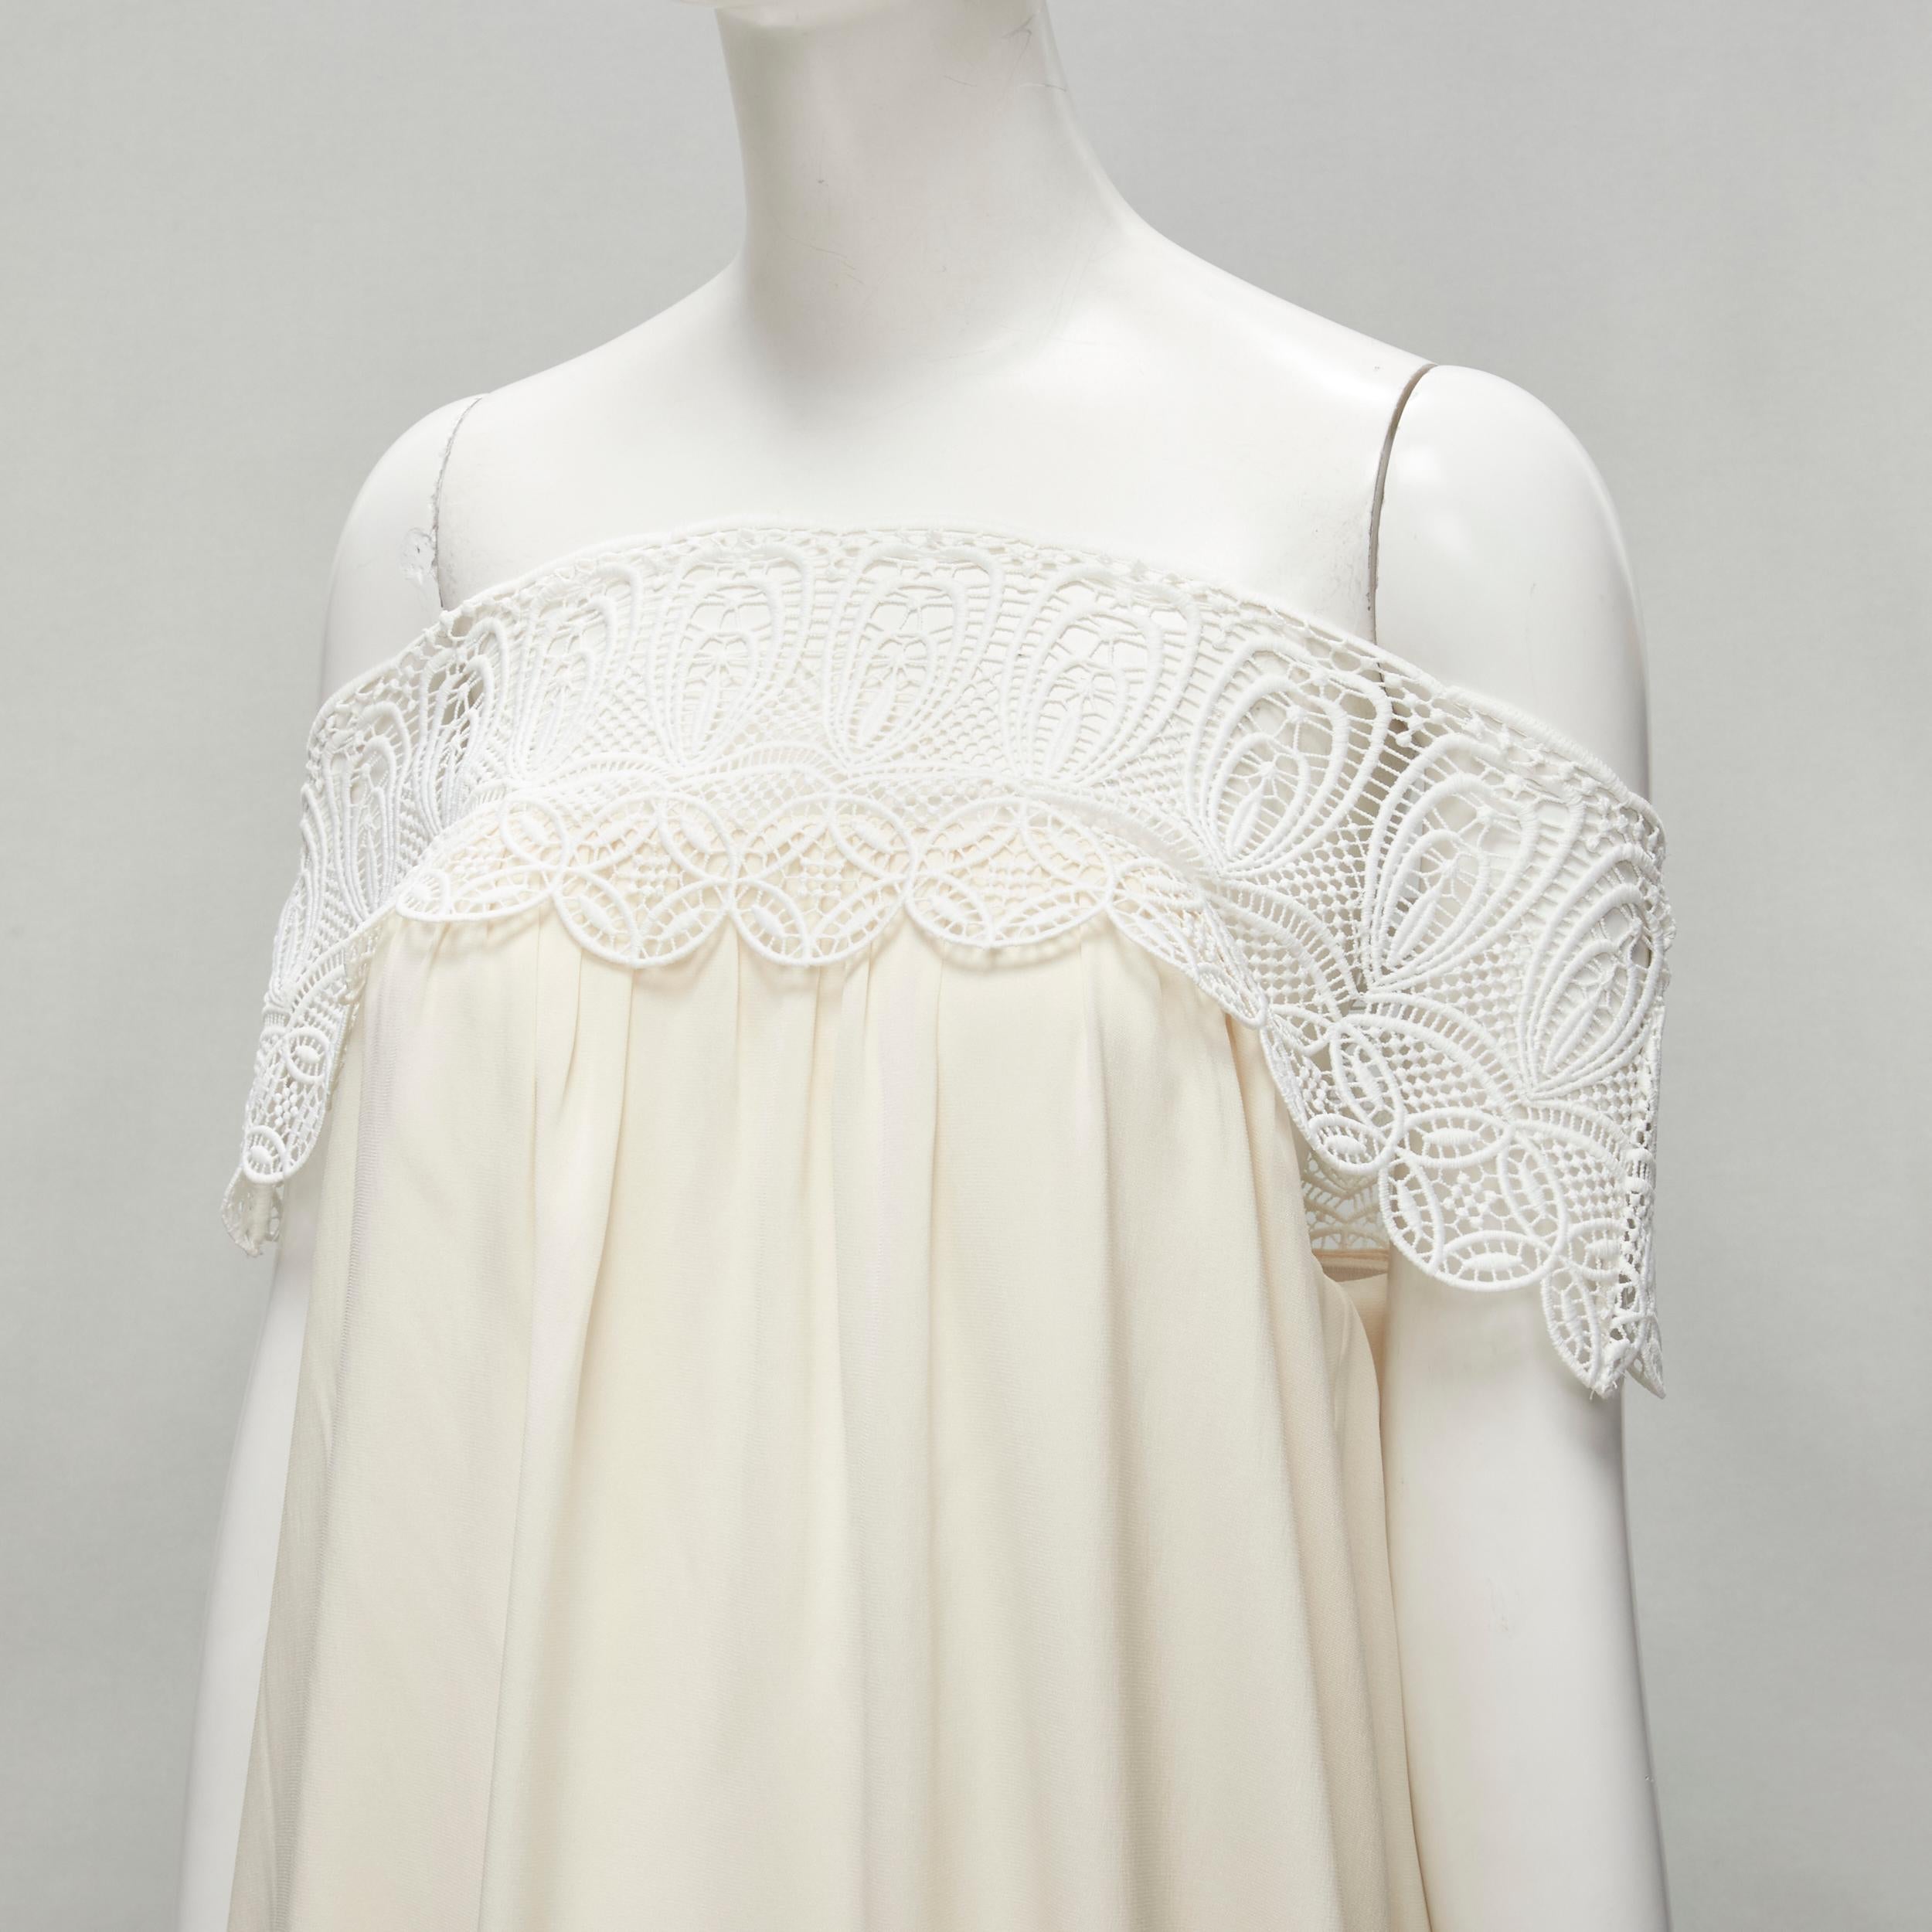 new SELF PORTRAIT cream lace detail off shoulder wedding dress UK10 M
Reference: YNWG/A00130
Brand: Self Portrait
Material: Viscose, Silk
Color: Cream
Pattern: Solid
Closure: Slip On
Extra Details: Two side pockets present.
Made in: